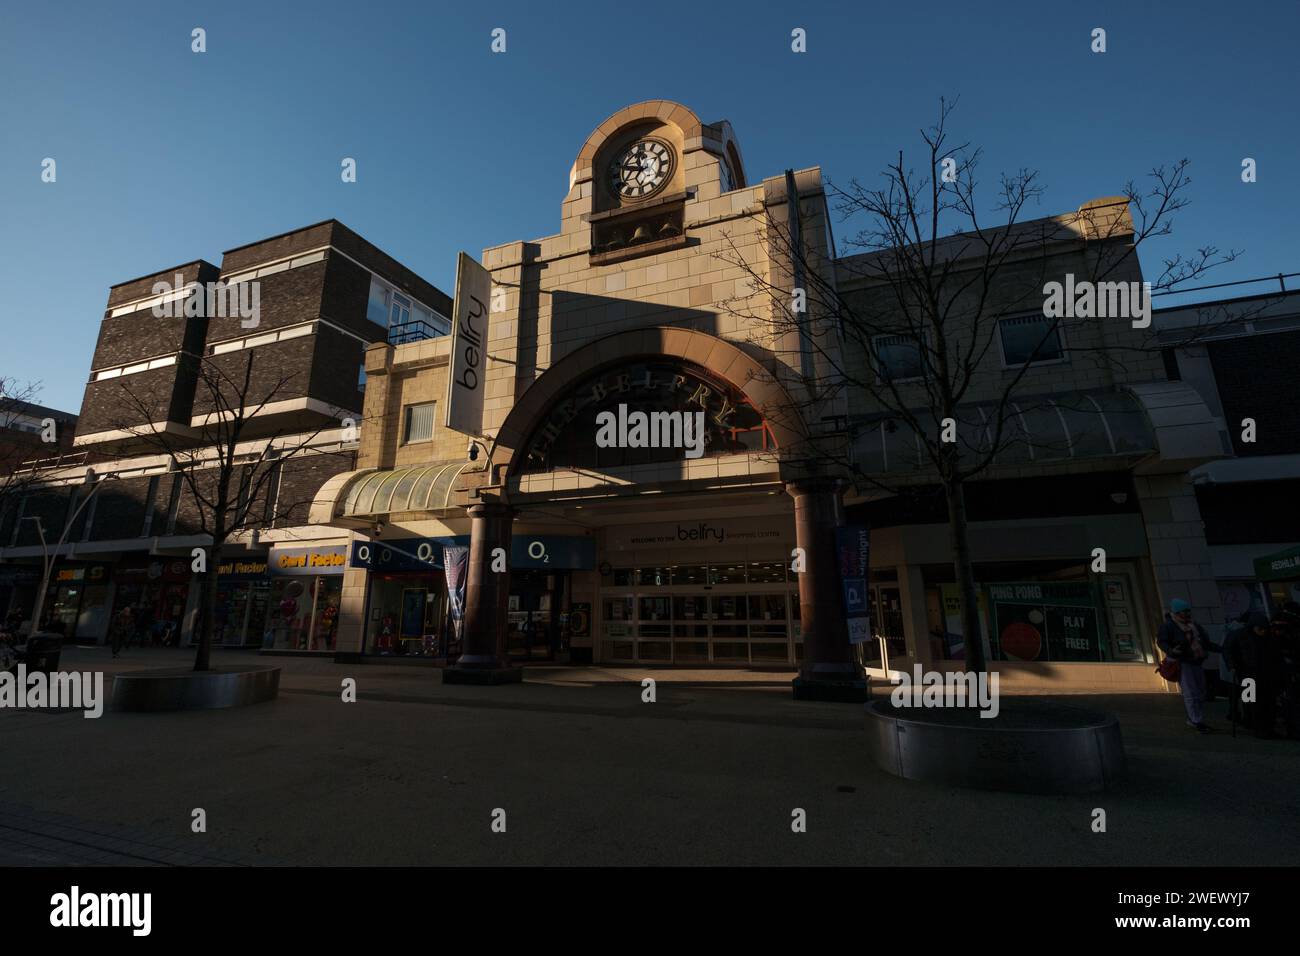 Belfry centre commercial High Street Entrance Redhill Surrey.England. Banque D'Images